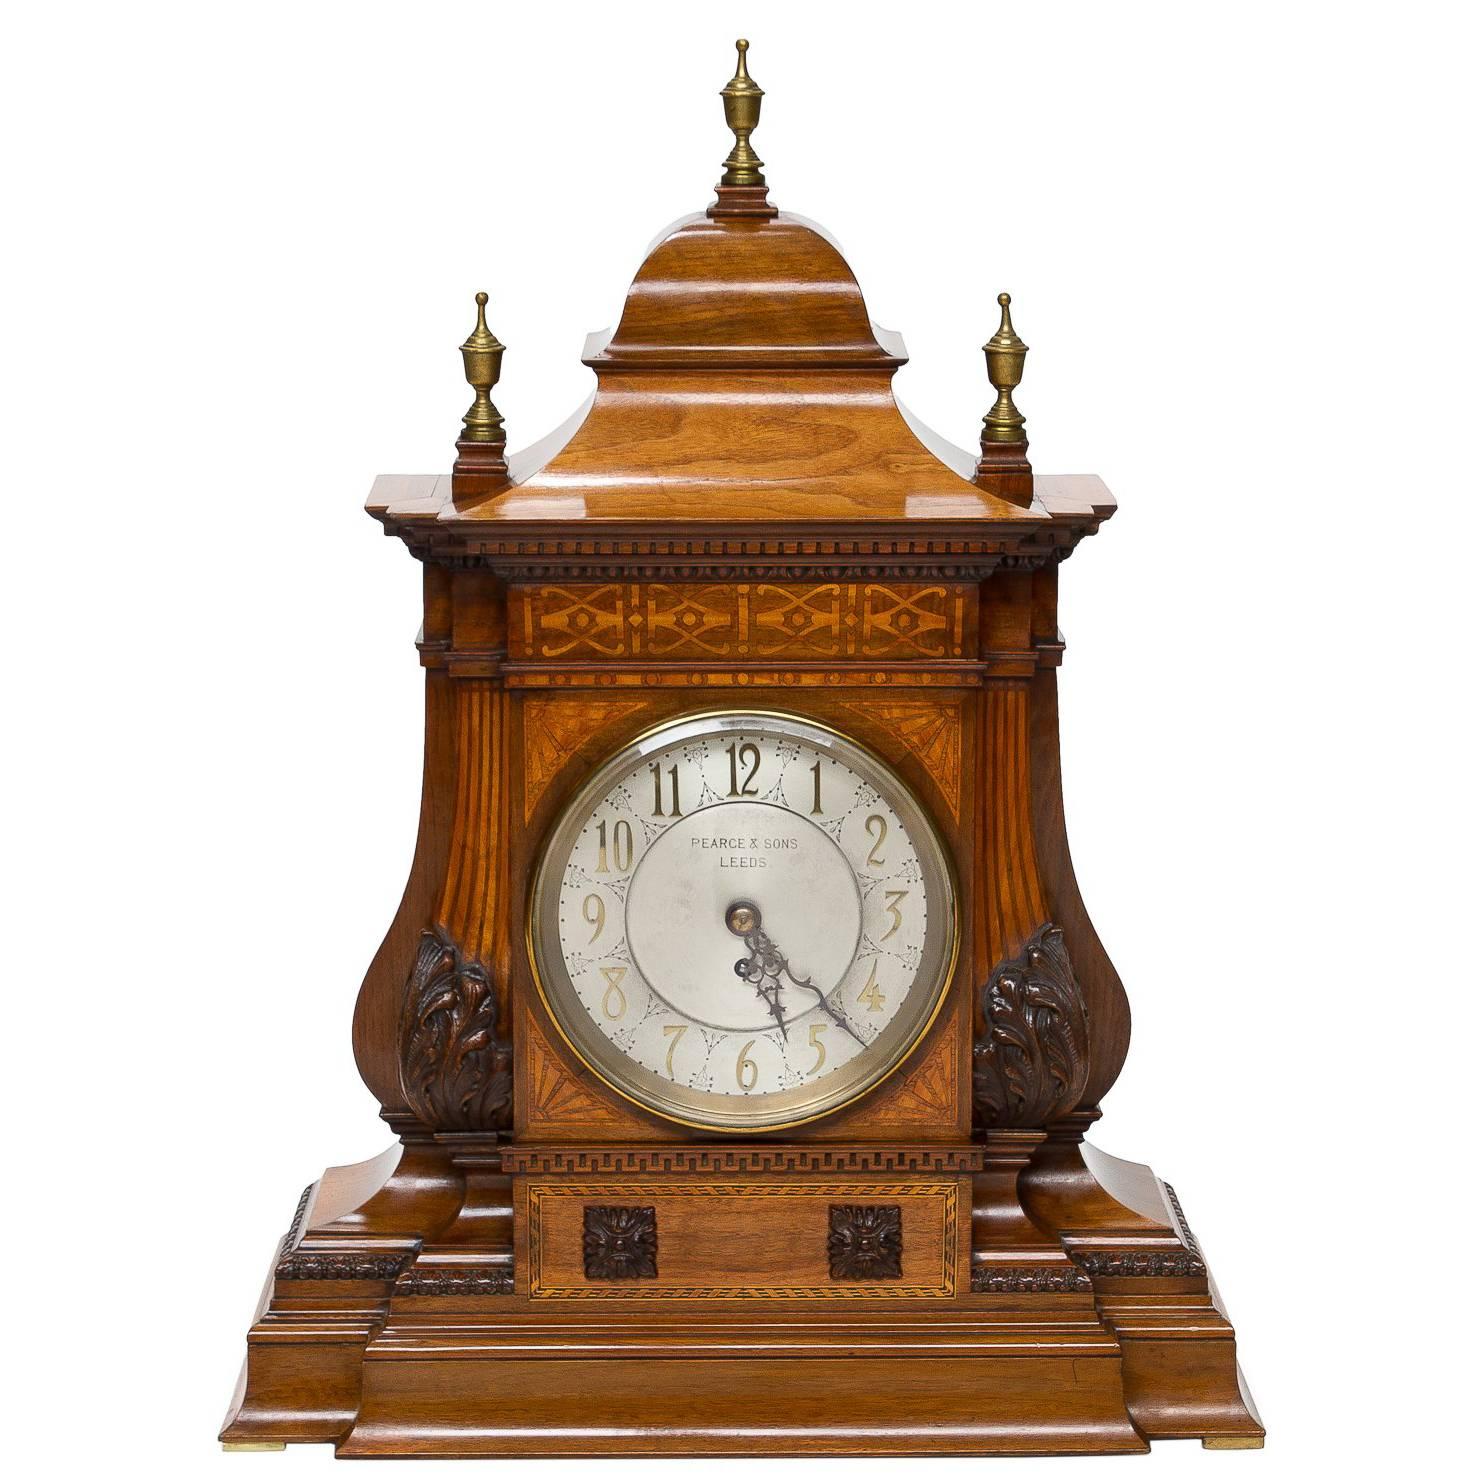 19th Century English Large Mantle Clock with Fusée Movement